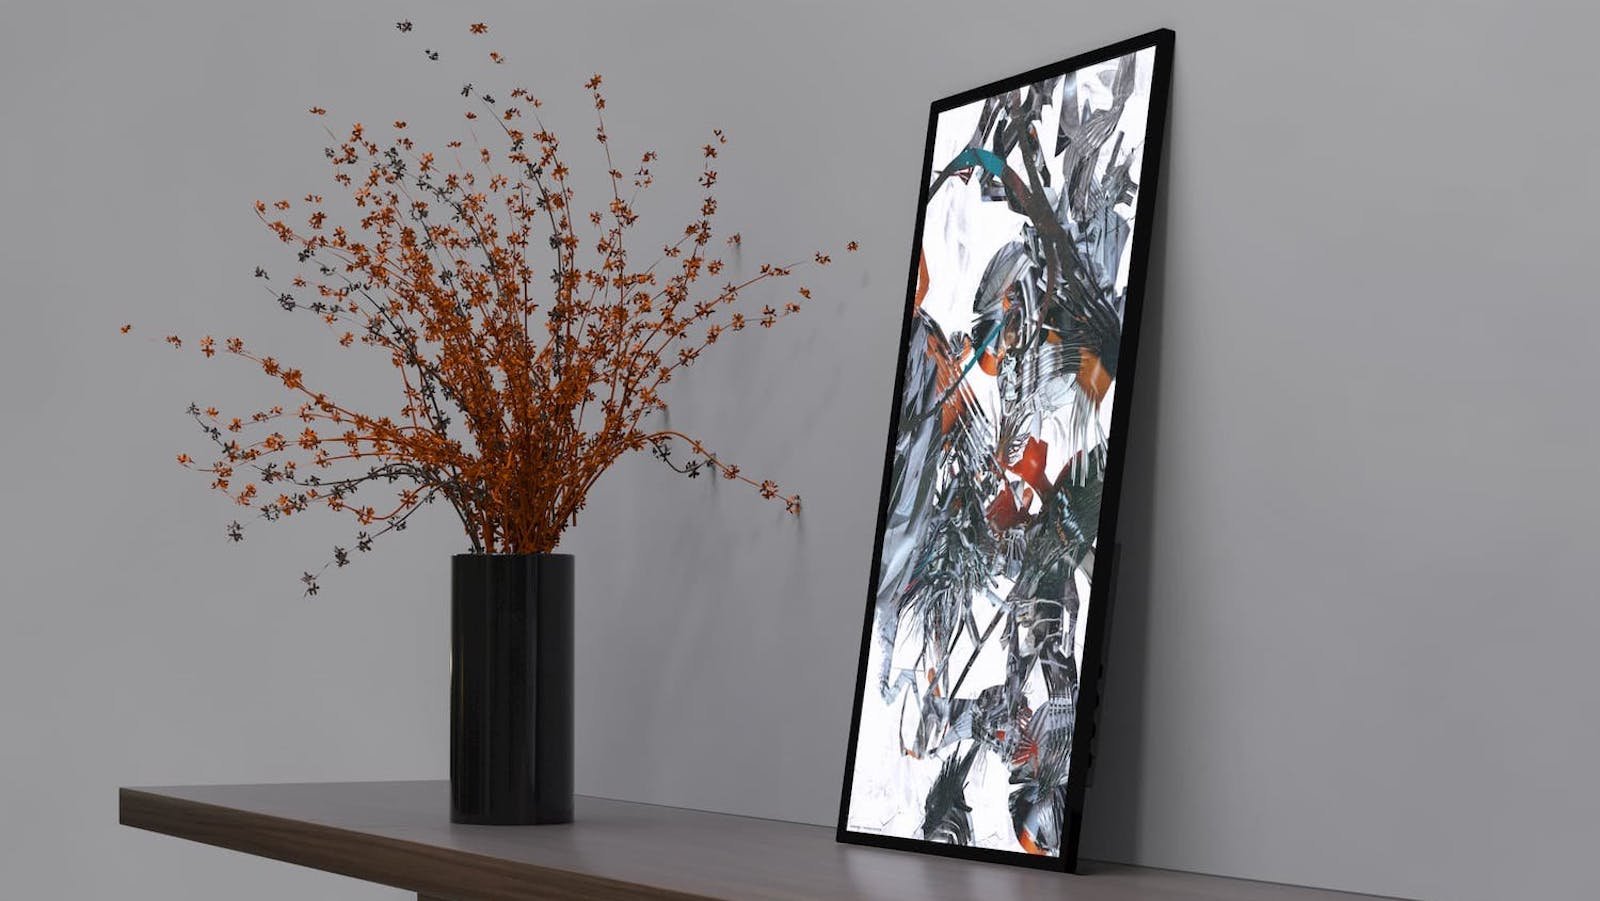 FRAMED Mono X7 Series digital canvases display photography, poetic animations, and more